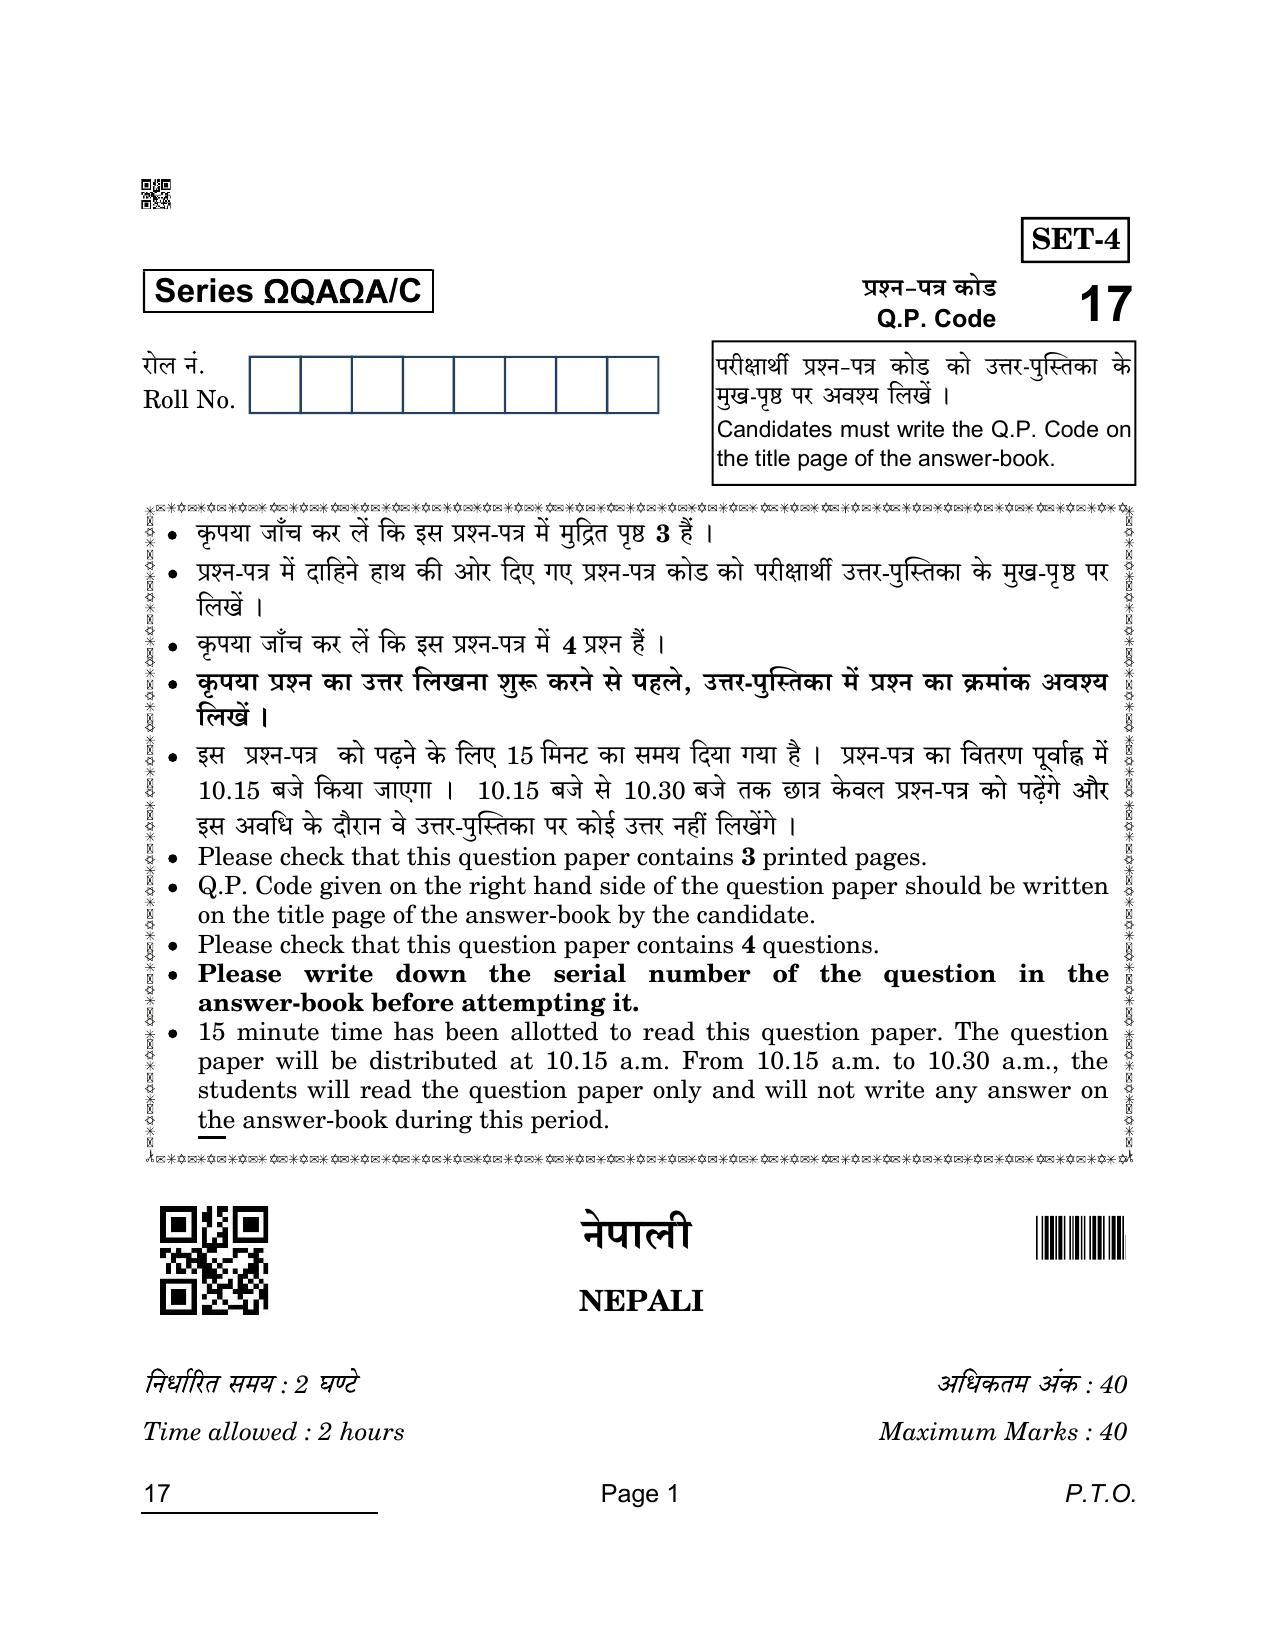 CBSE Class 10 17 Nepali 2022 Compartment Question Paper - Page 1